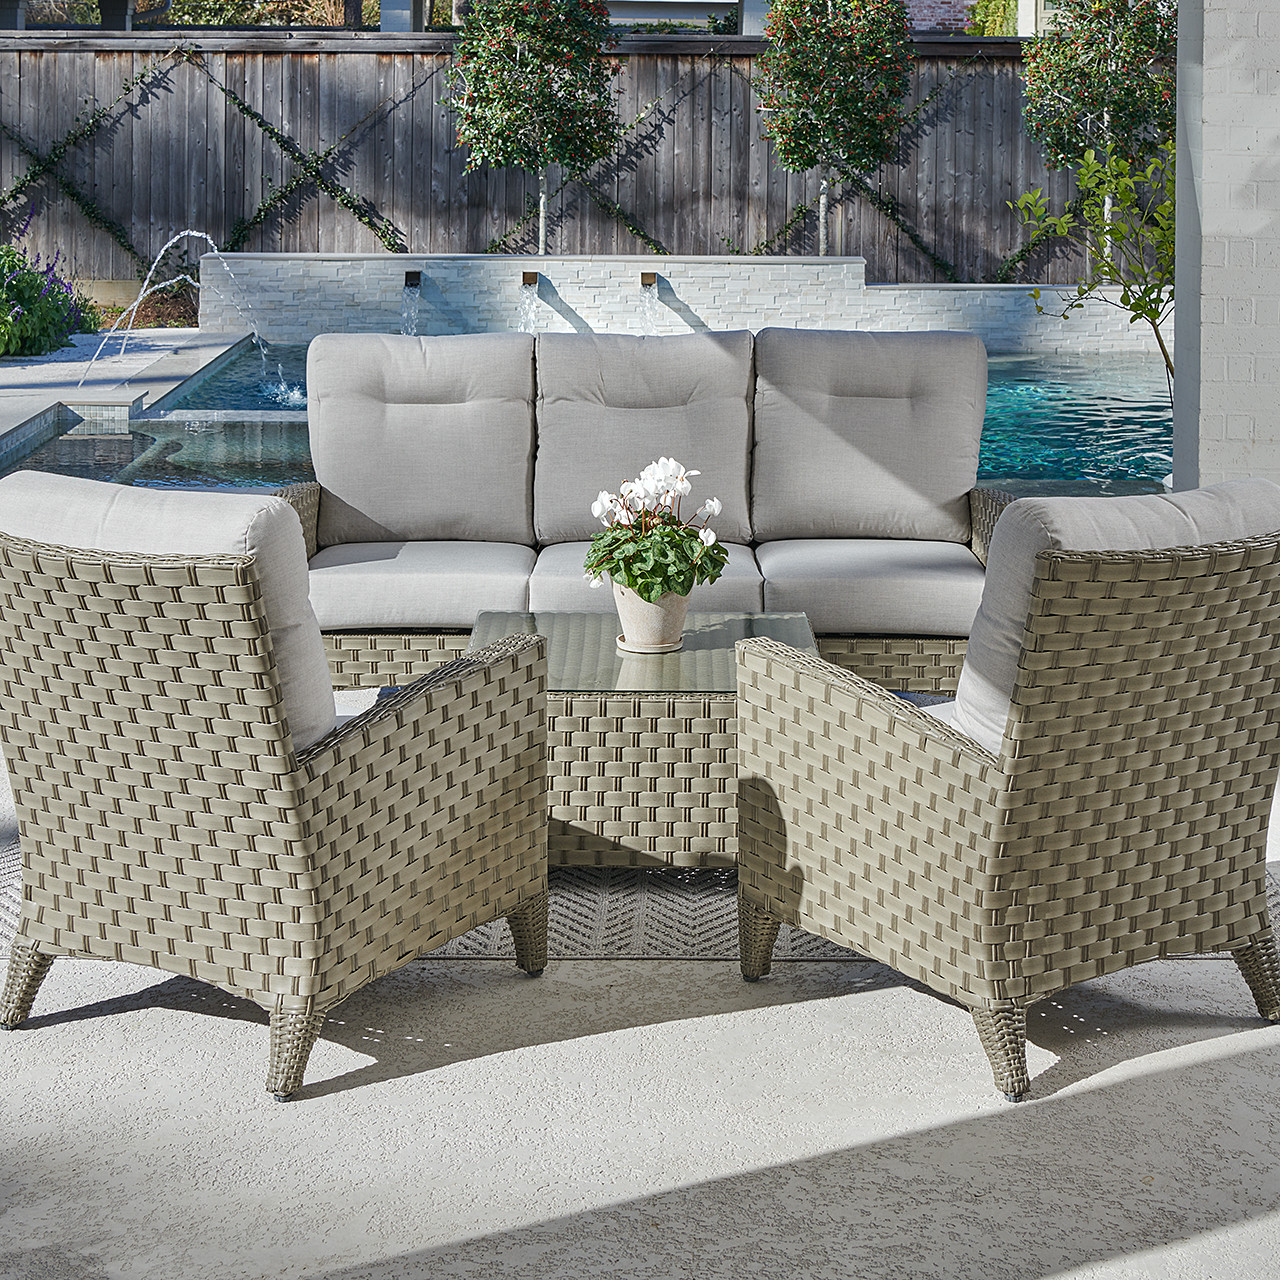 Gramercy Outdoor Wicker with Cushions 4 Piece Sofa Set + 32 in. Sq. Coffee Table